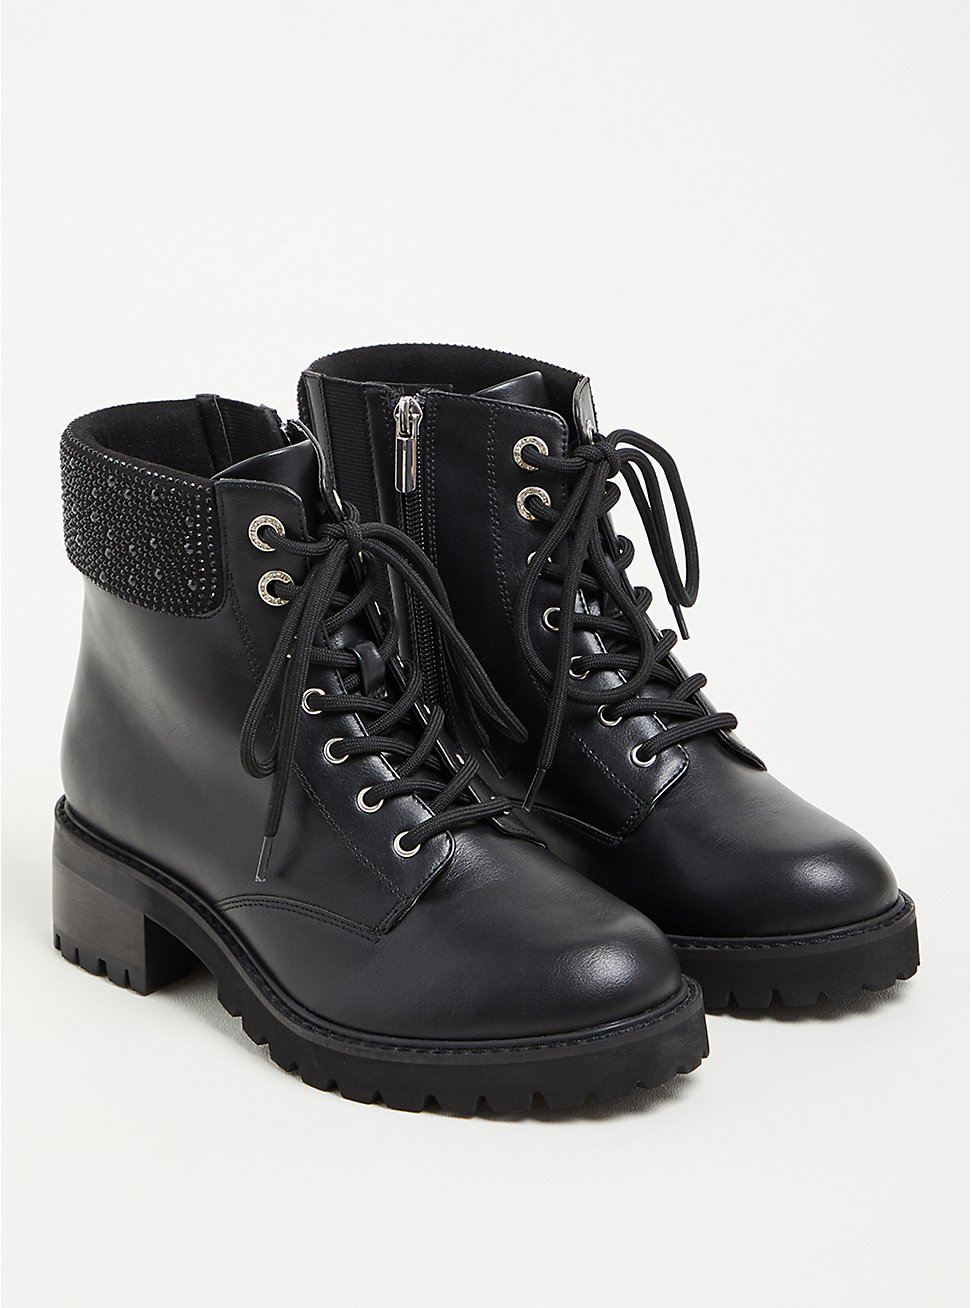 Embellished Cuff Combat Boot - Faux Leather Black (WW), BLACK, hi-res